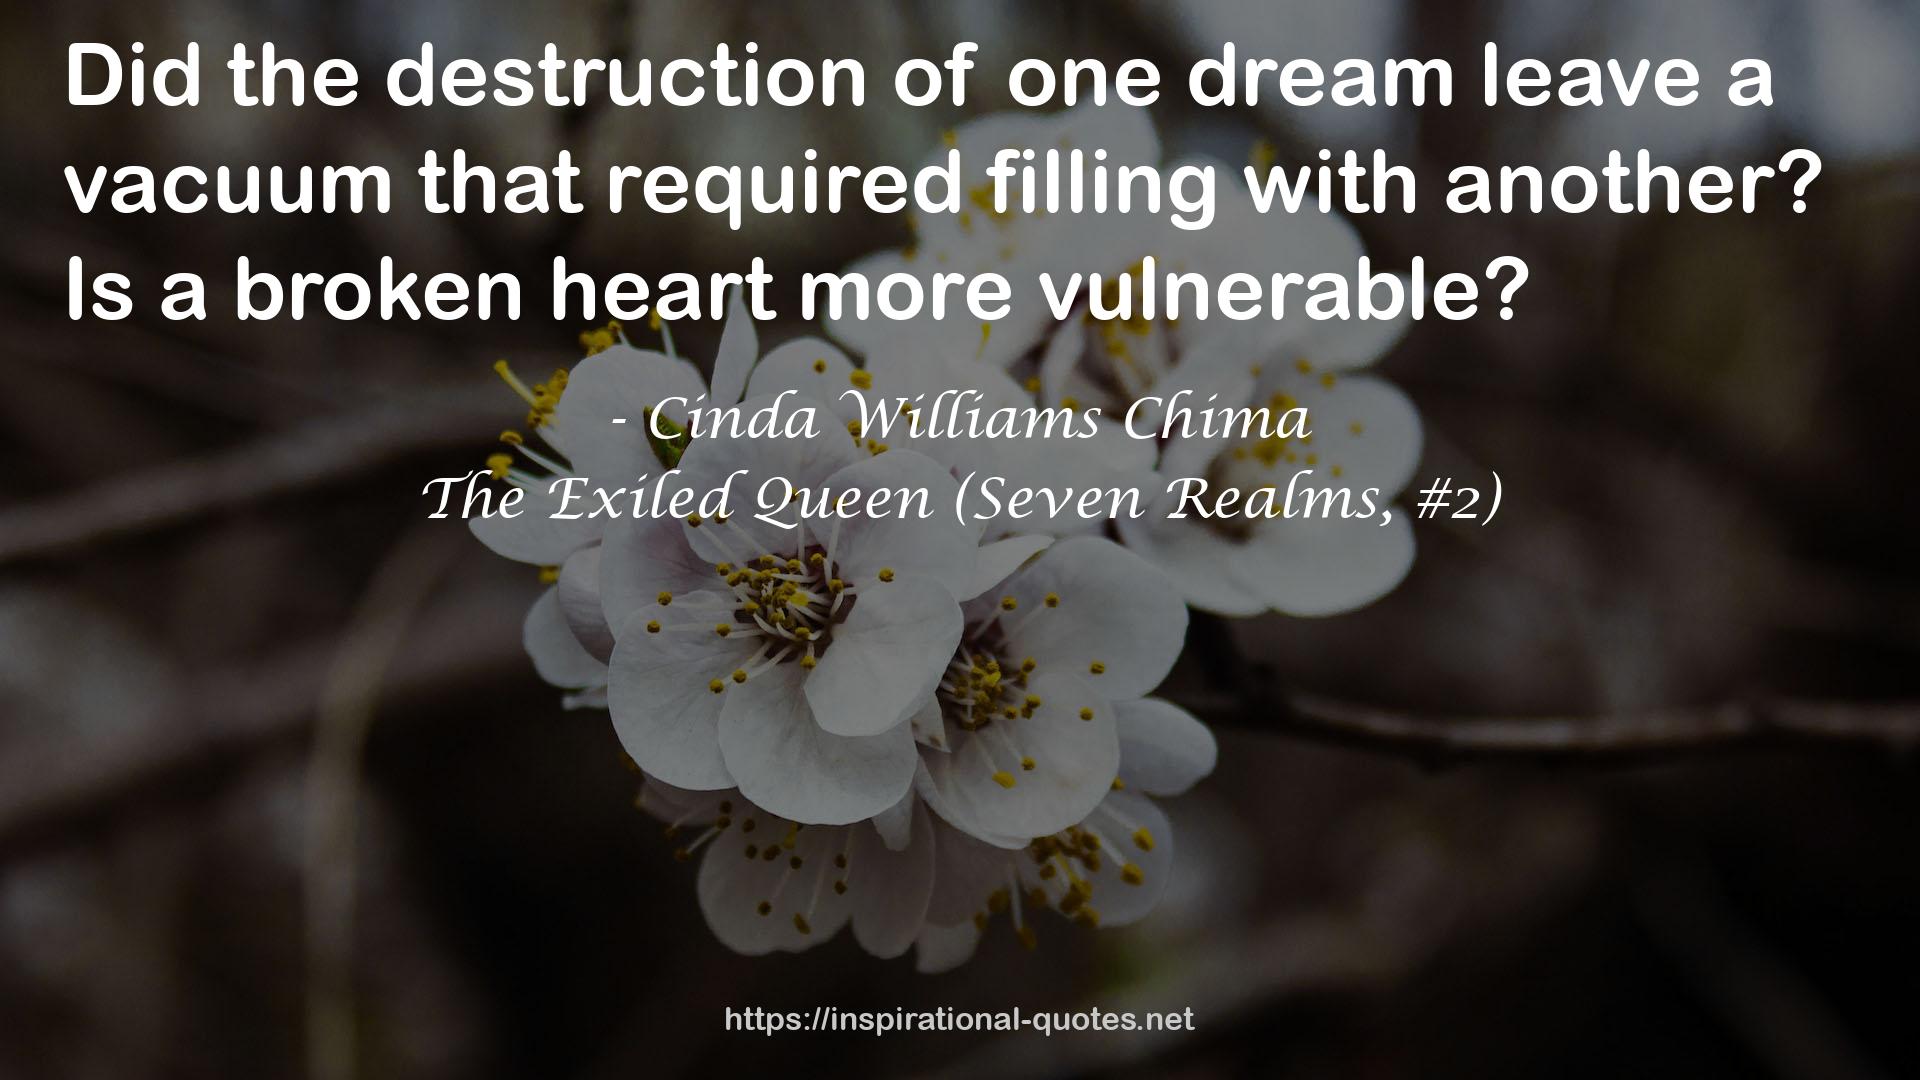 The Exiled Queen (Seven Realms, #2) QUOTES